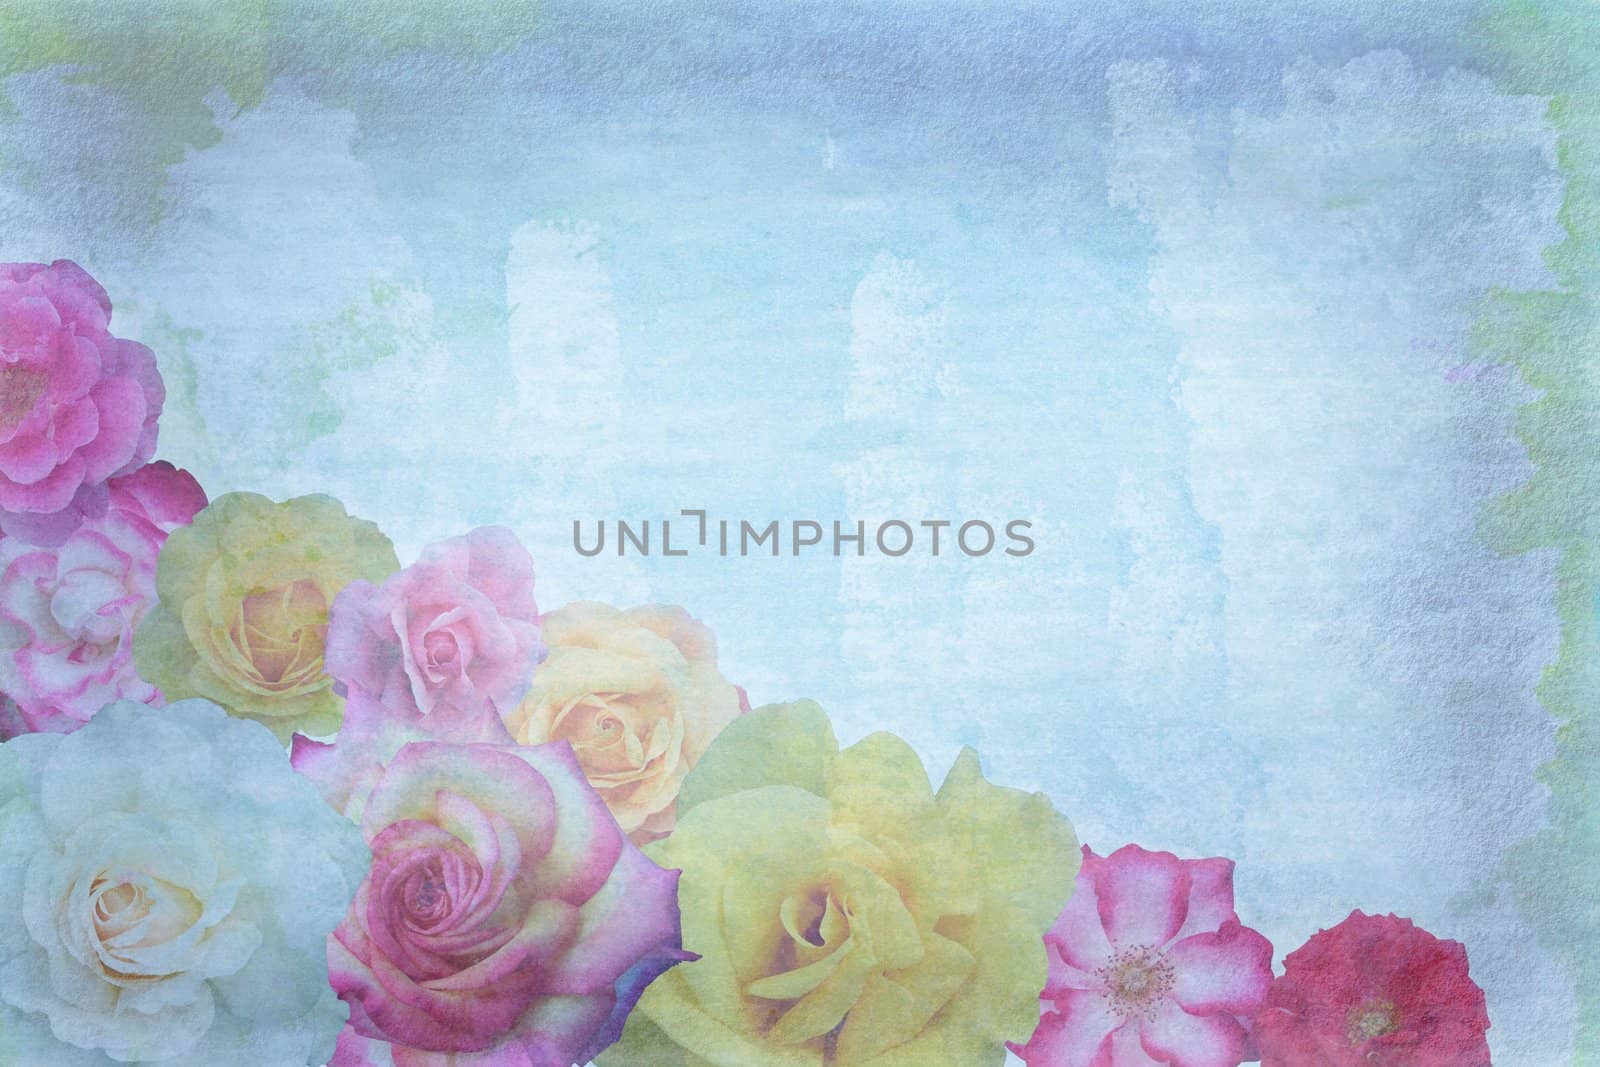 Roses on grunge background with blue tint